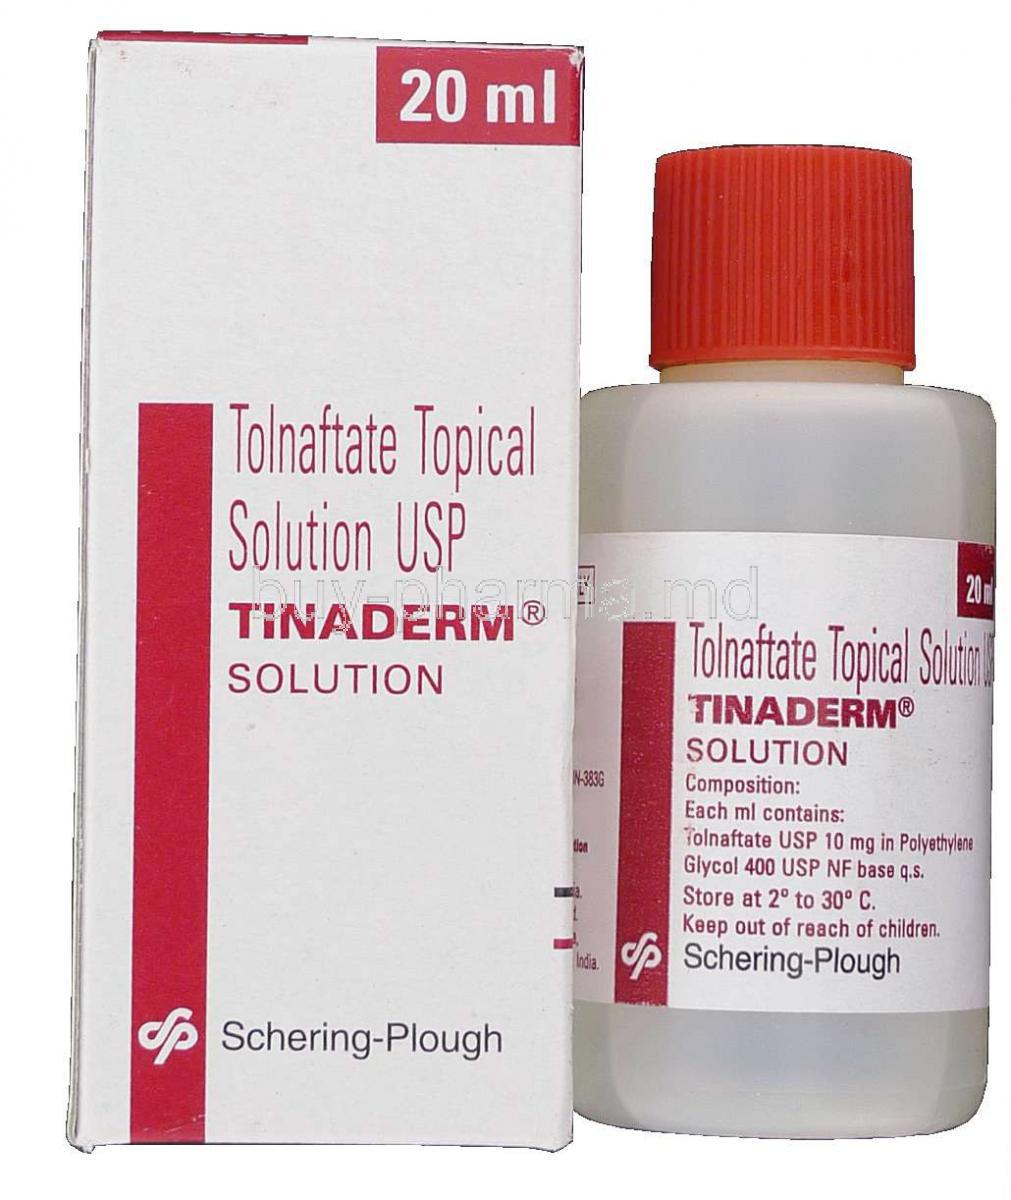 Tinaderm,  Tolnaftate Soluction